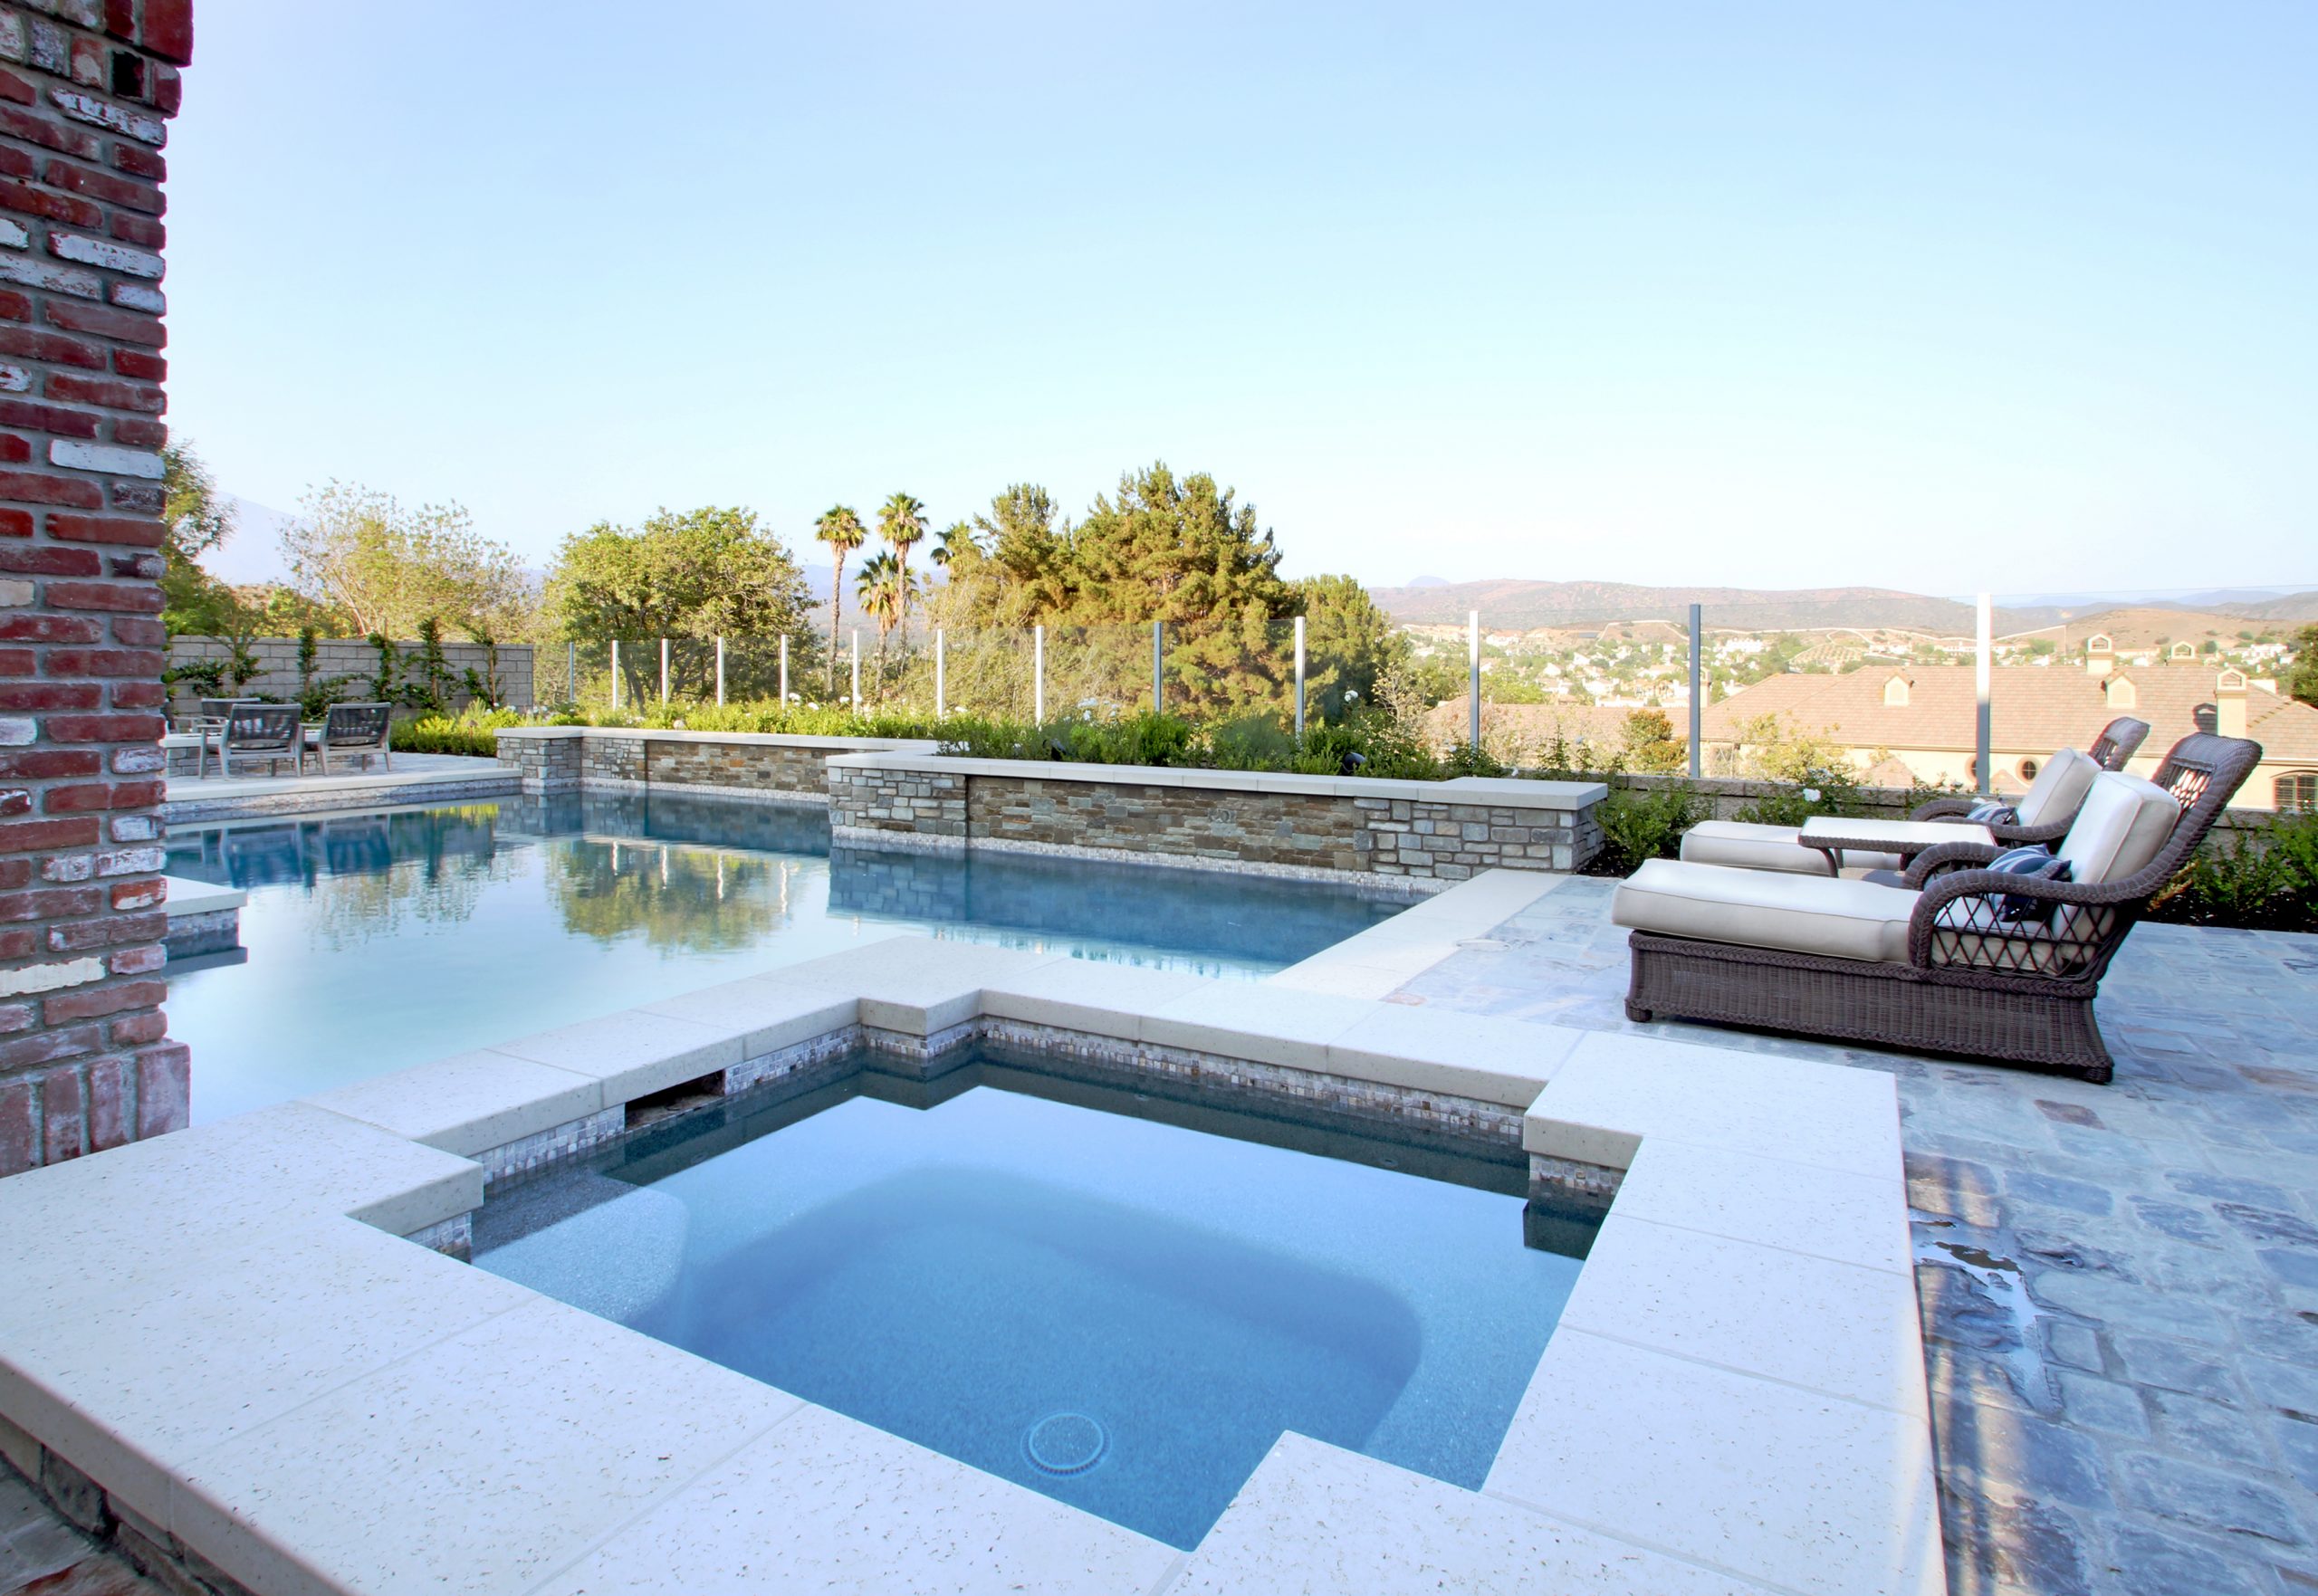 Elegant backyard layout with custom pool, stone deck, Dreamscape by MGR leading pool contractor in Orange County